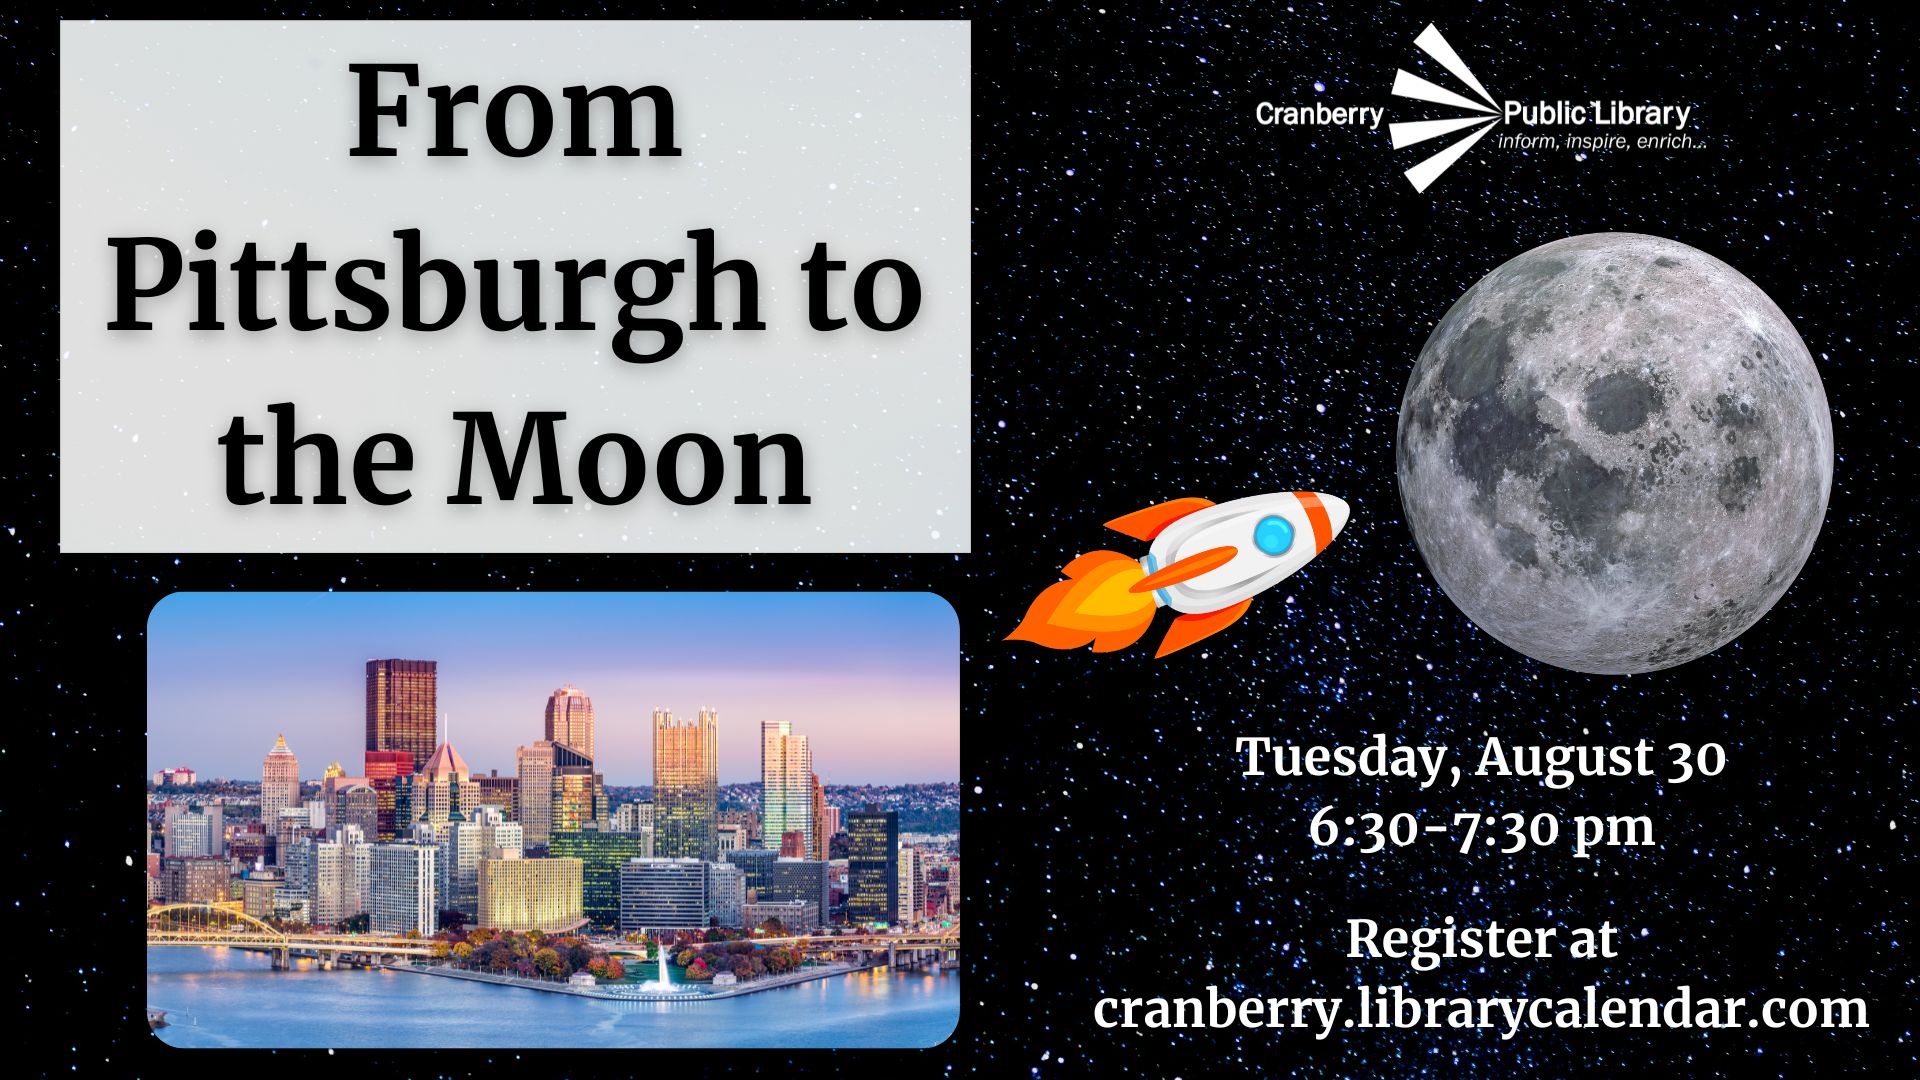 Flyer for From Pittsburgh to the Moon program